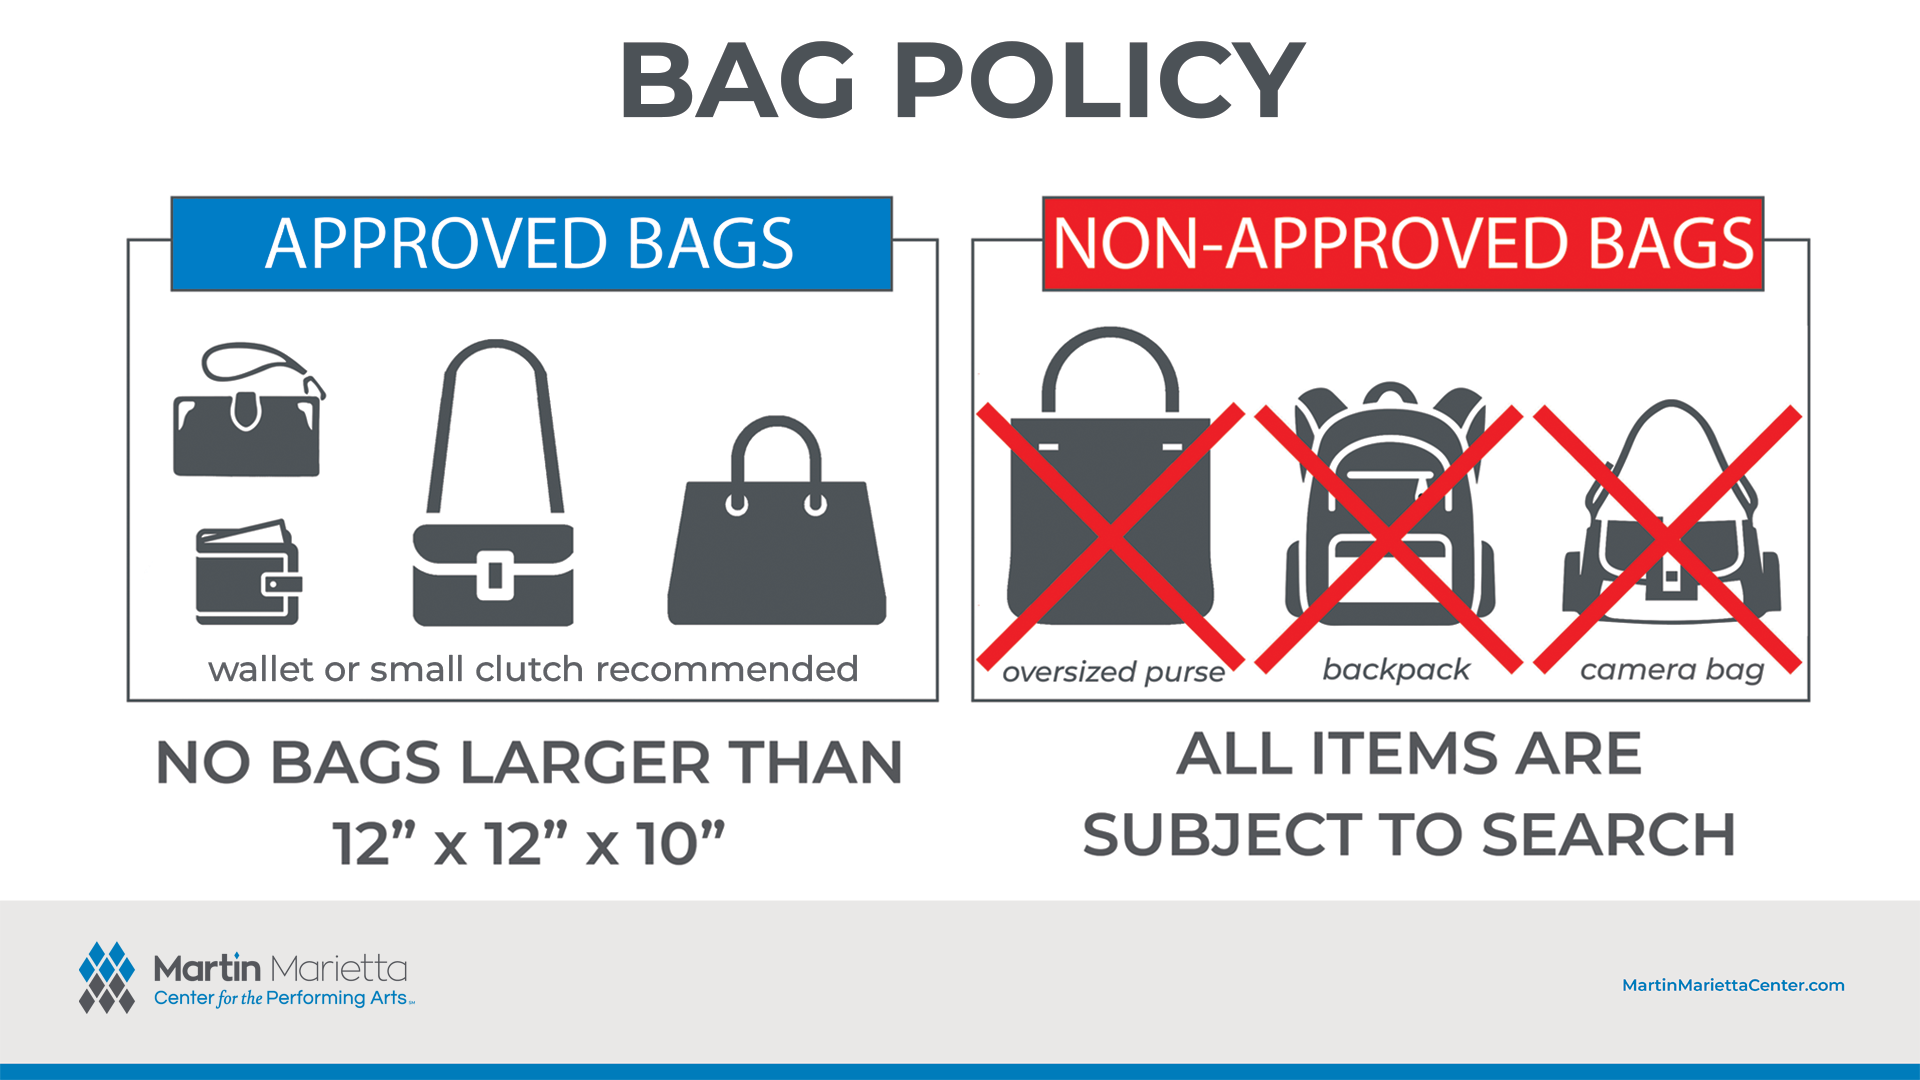 an image of the bag policy with approved and non approved icons of bags